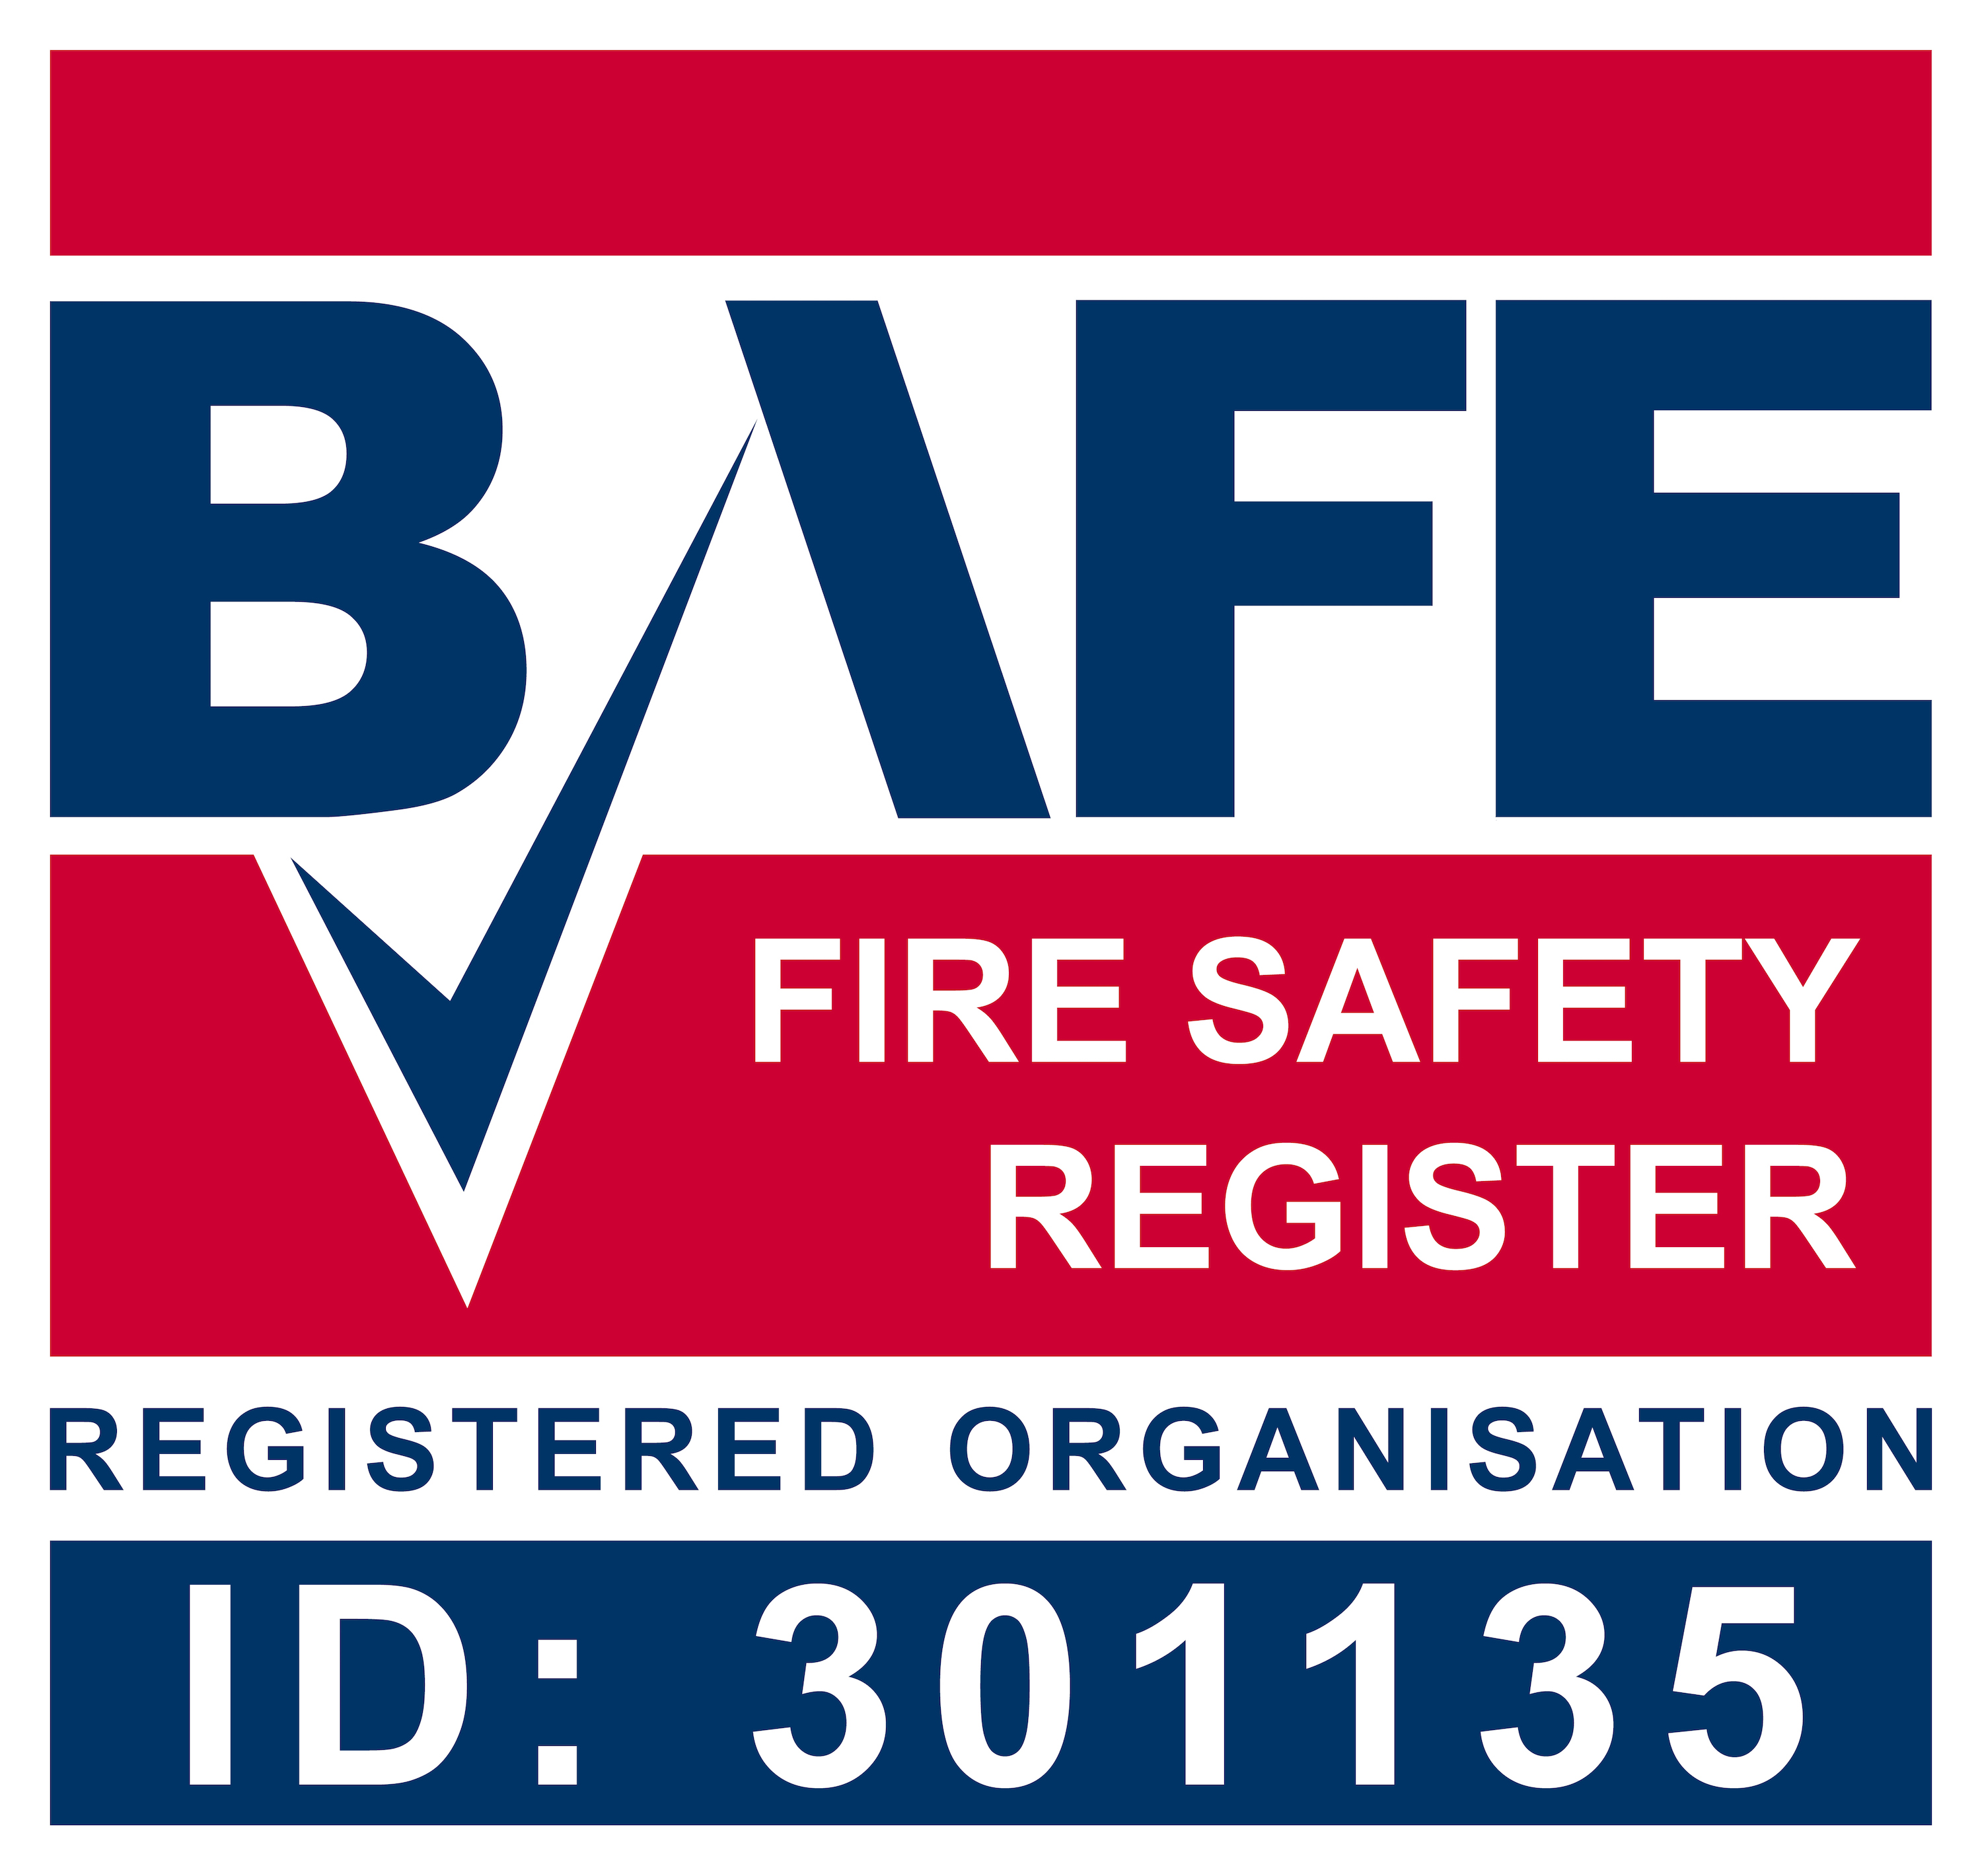 BAFE (British Approvals for Fire Equipment)